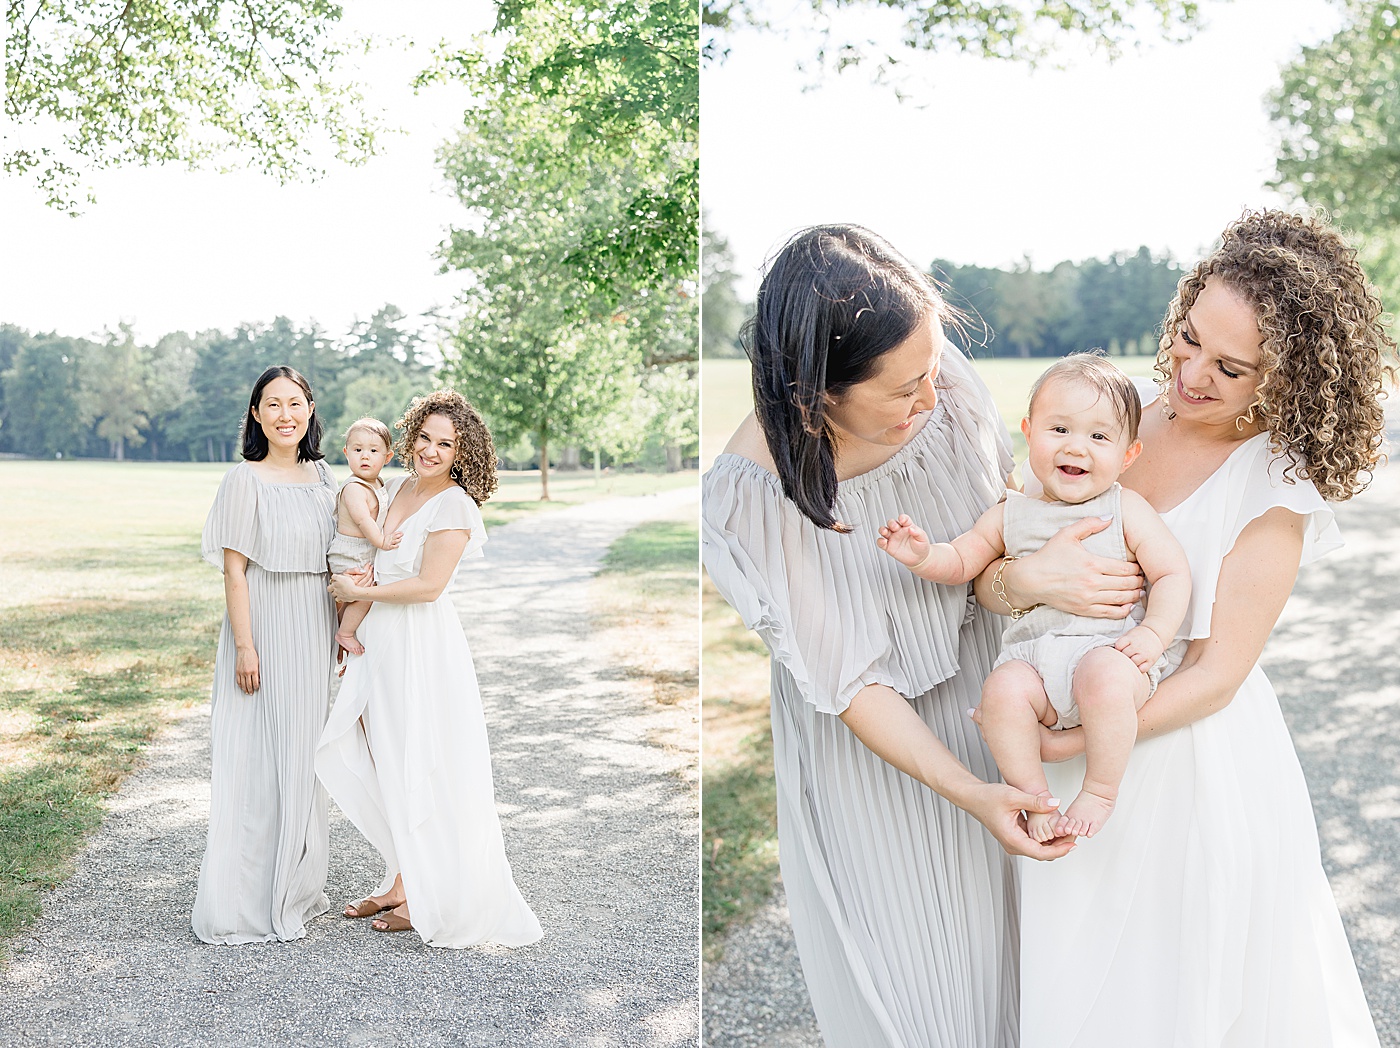 Same-sex couple holding their son during outdoor family photos | Kristin Wood Photography